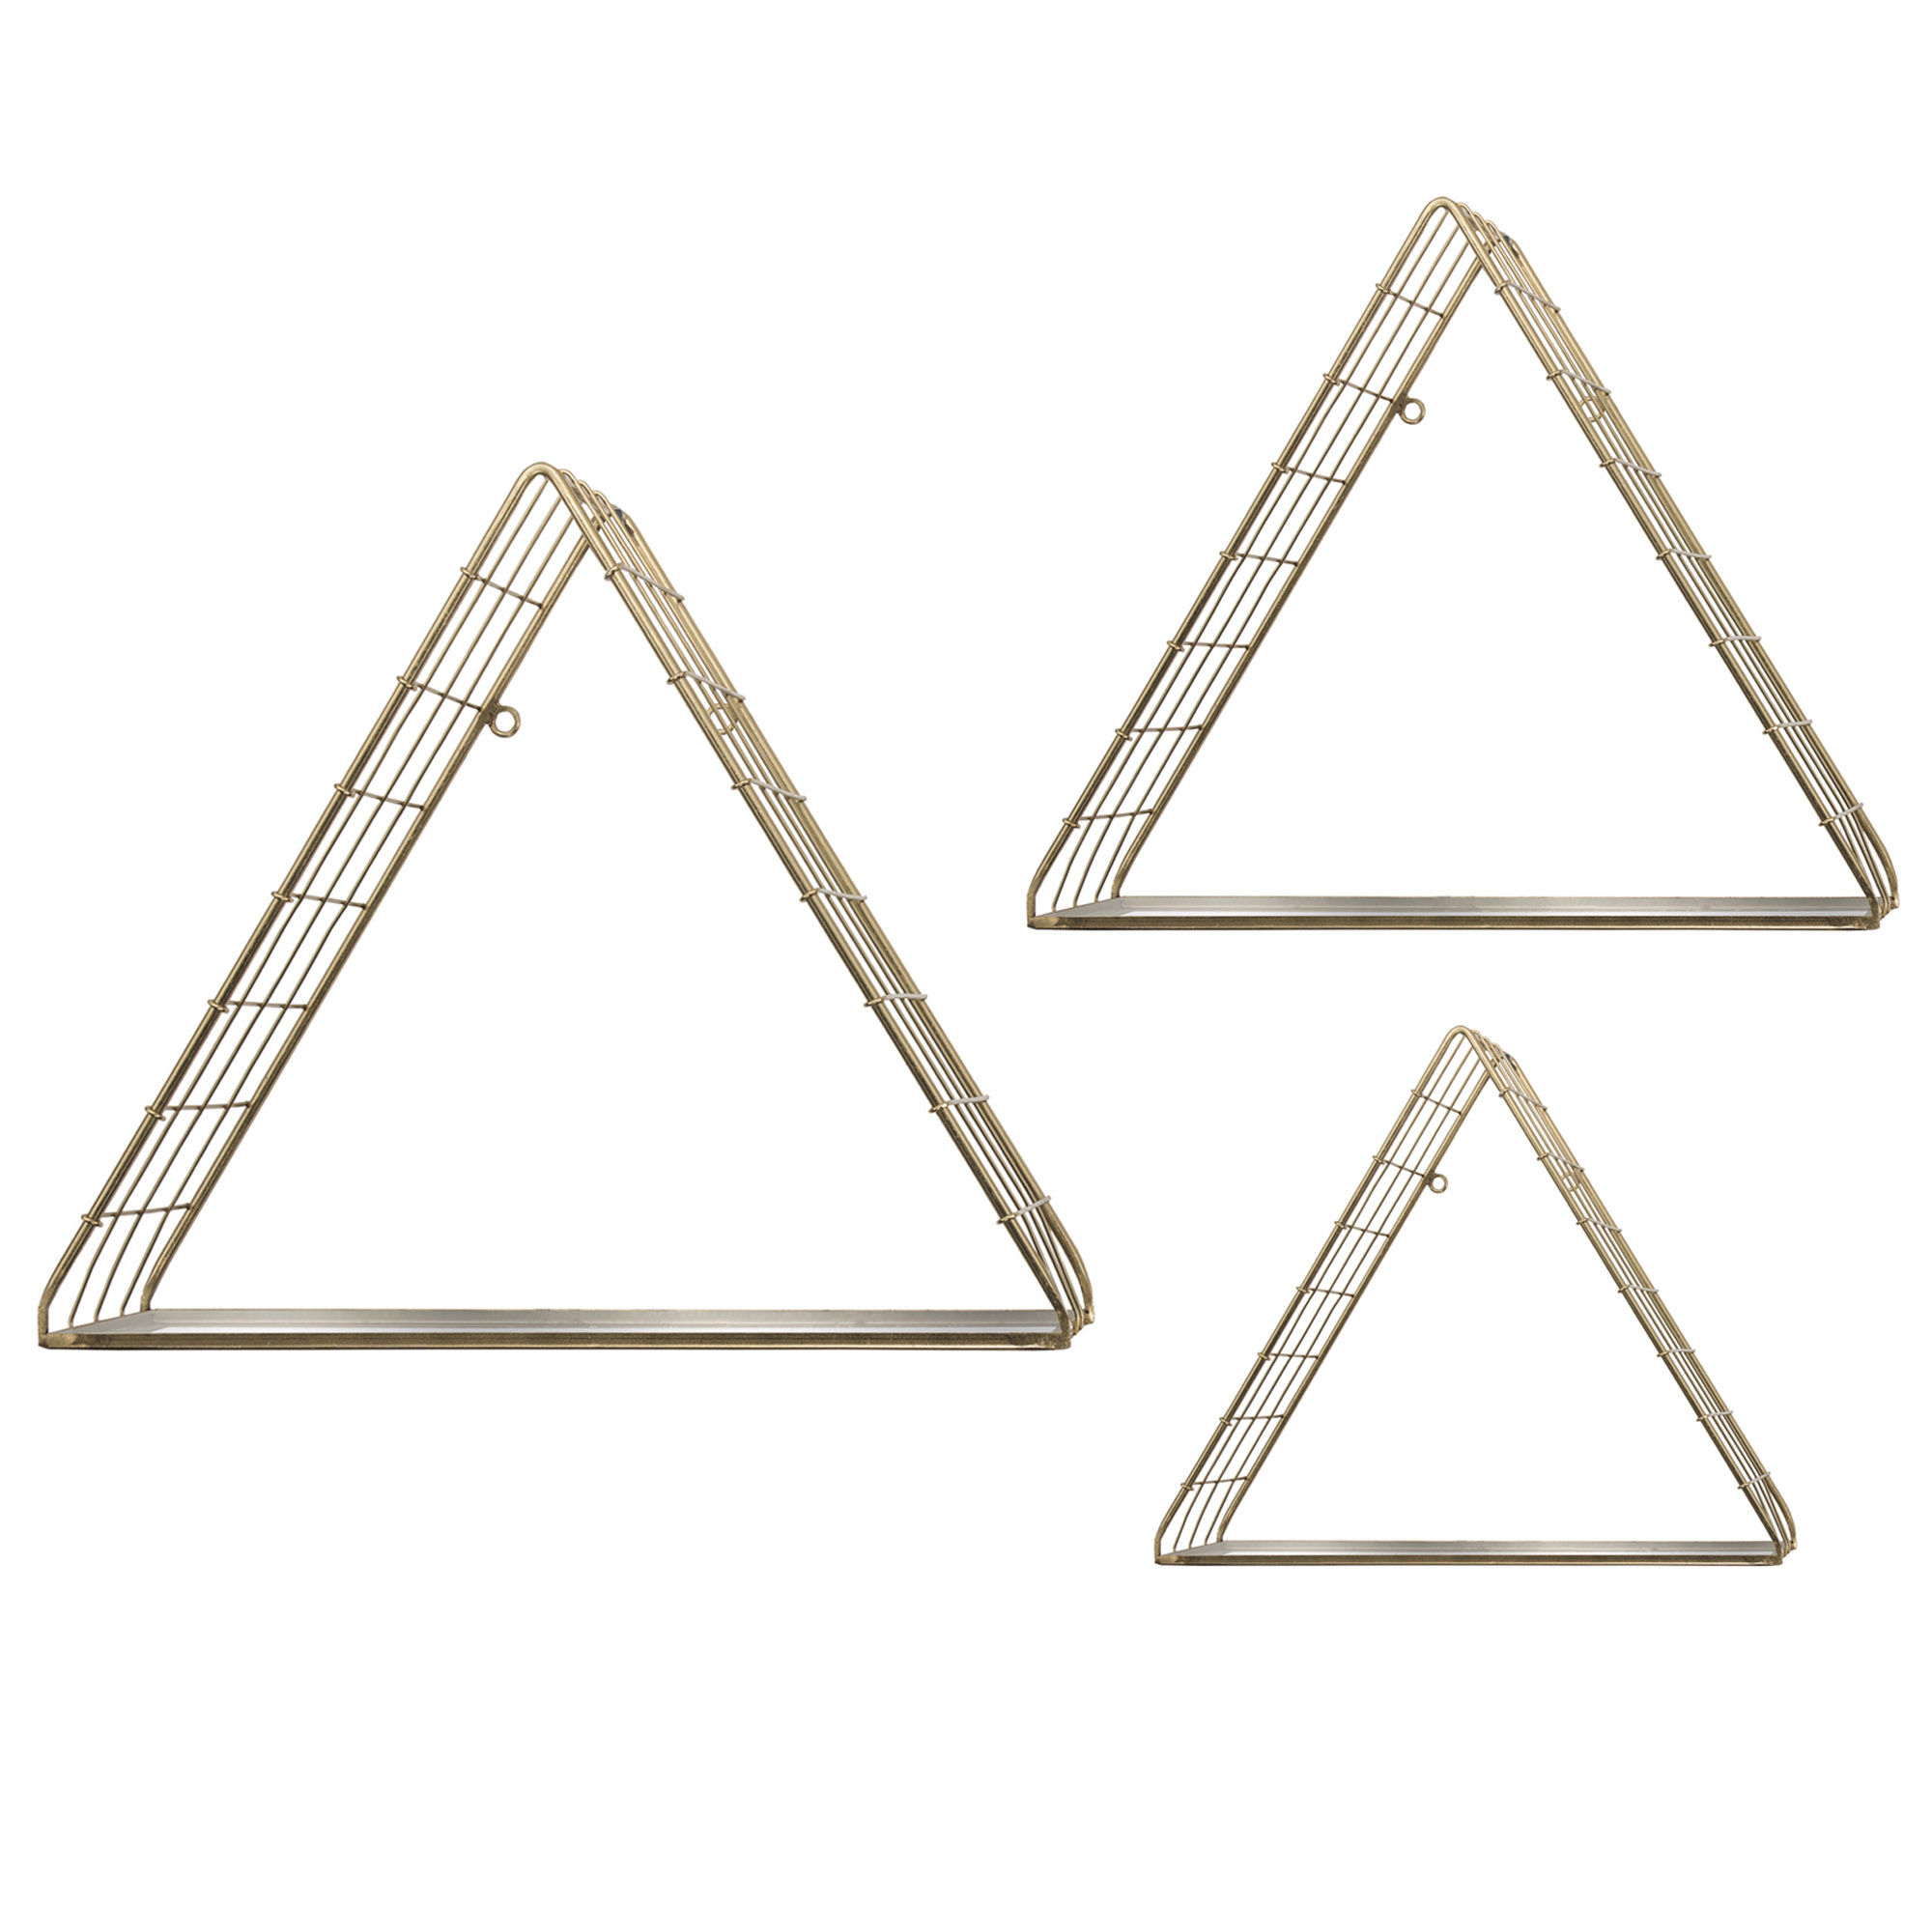 16" X 14" X 6" Golden Triangle (Set of 3)